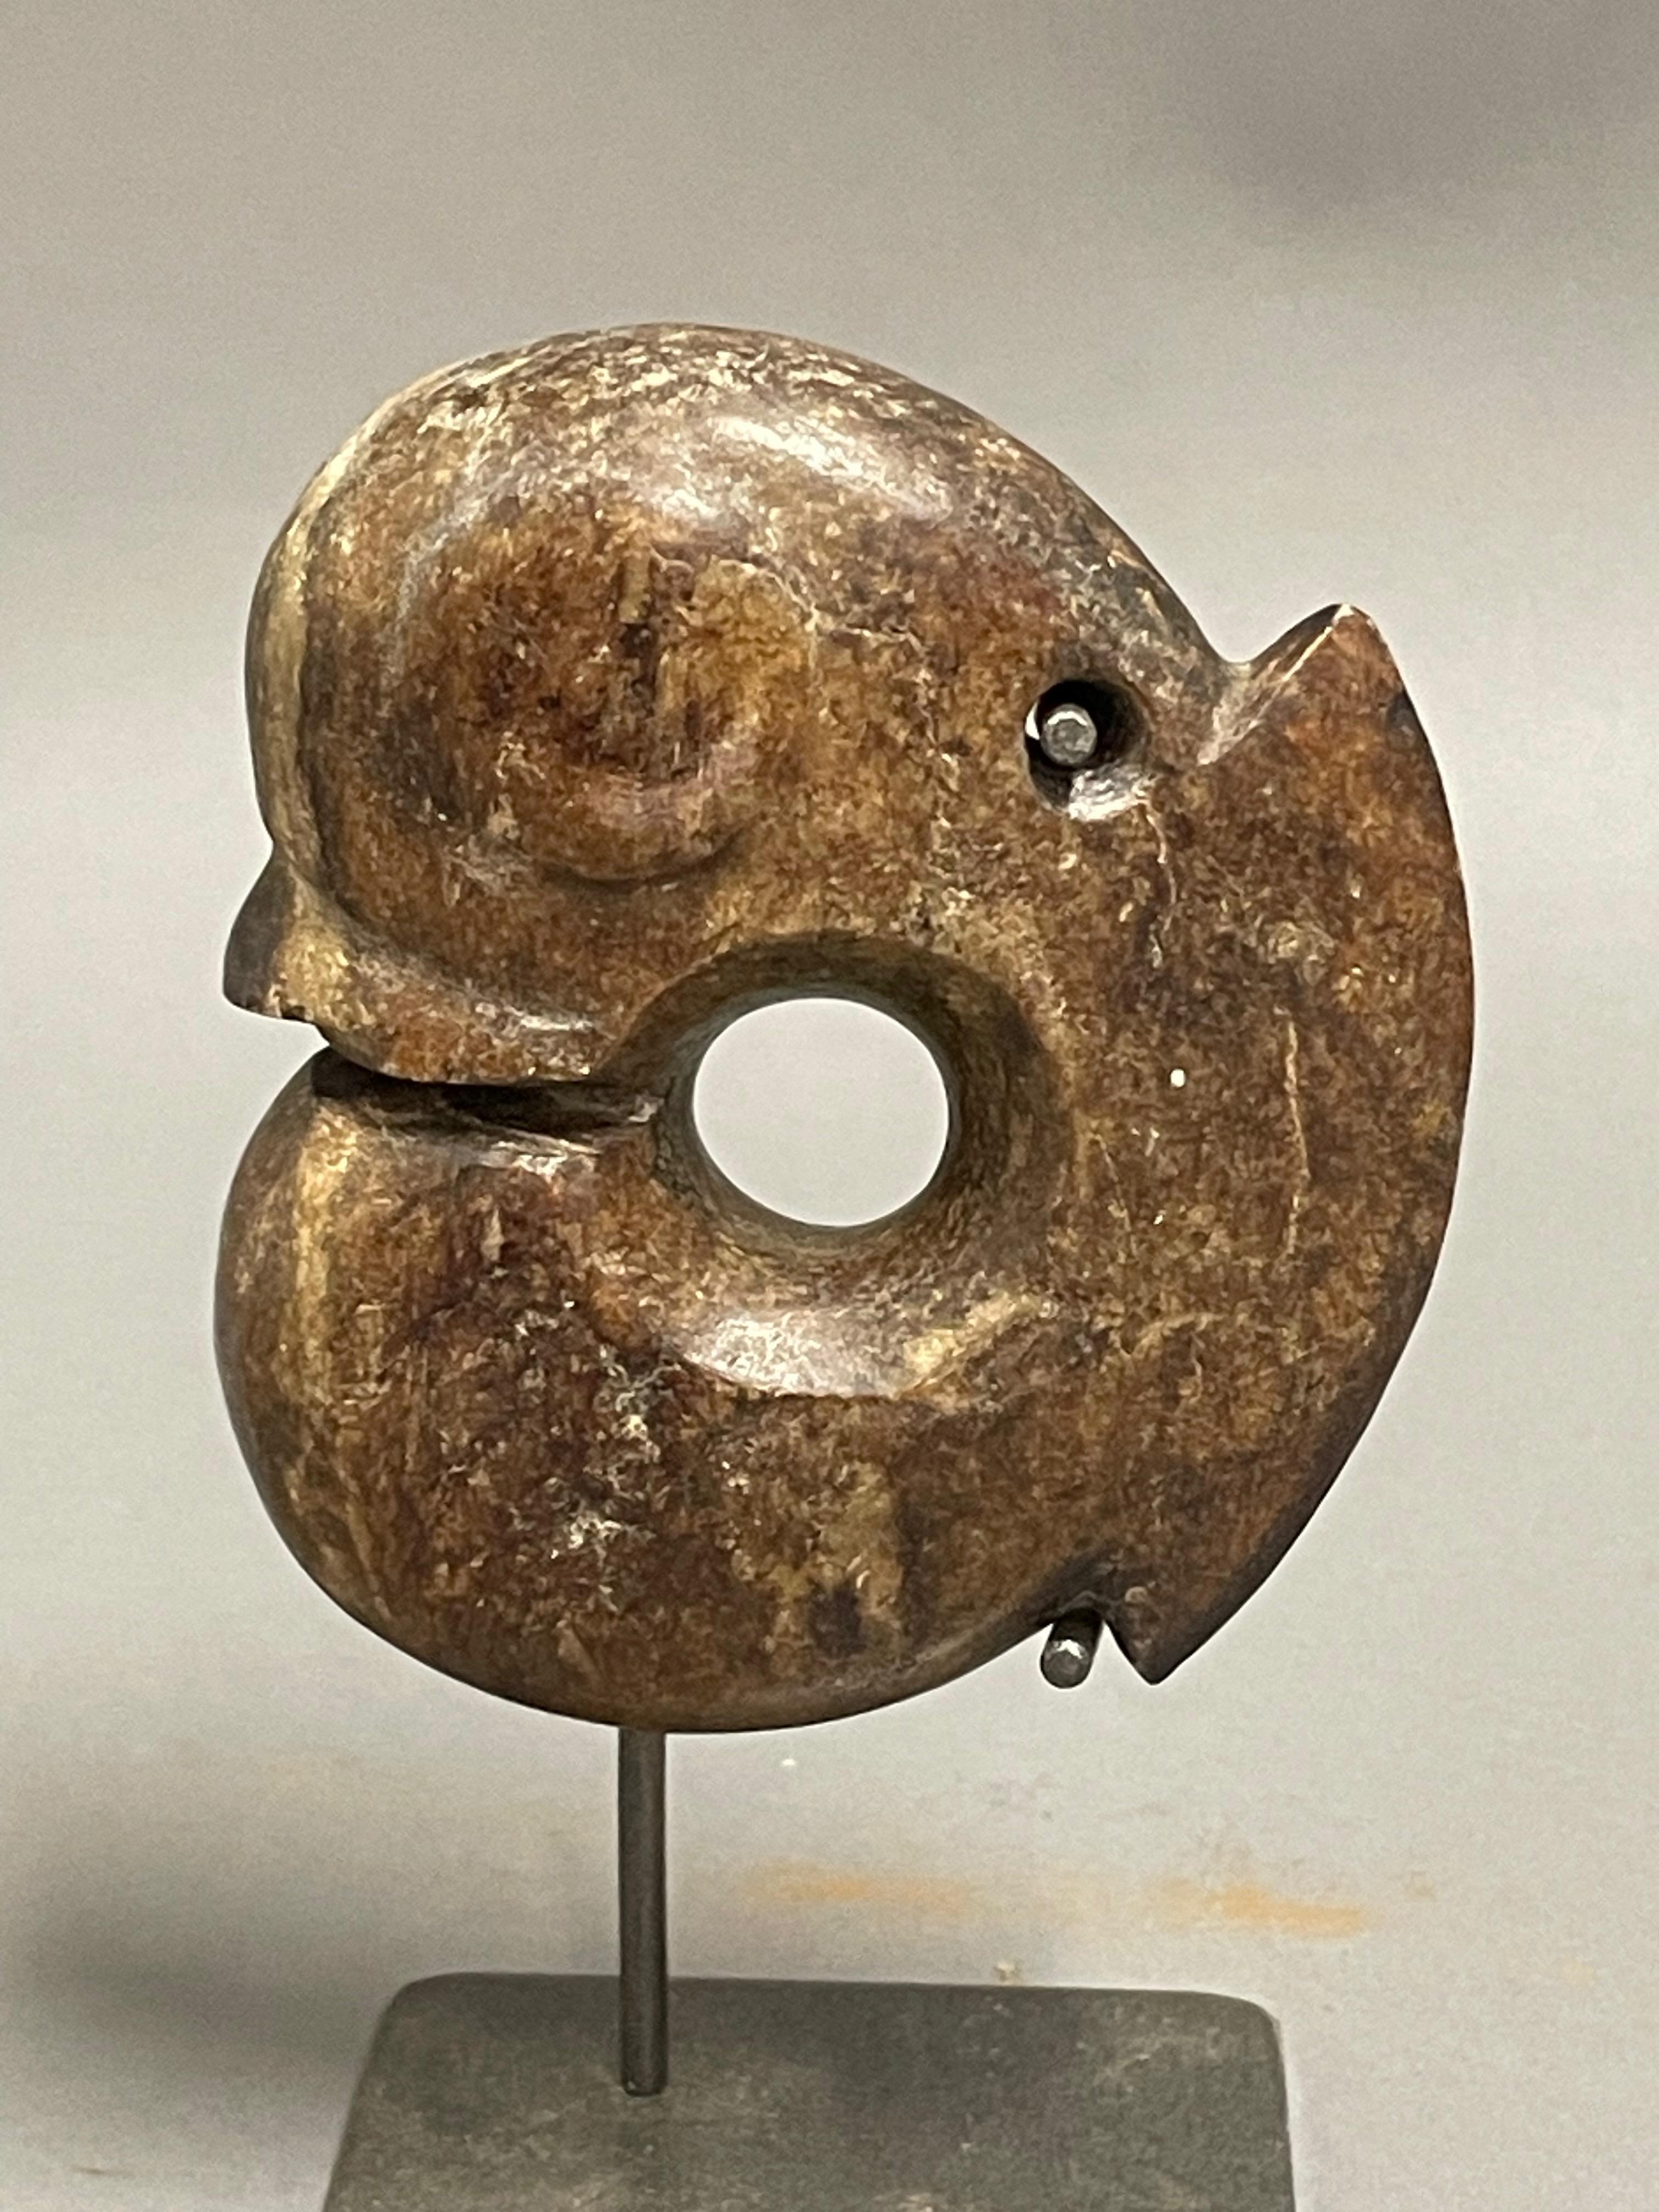 Contemporary Chinese hand carved stone shrimp sculpture.
Sits nicely with larger S6767.
Can be featured with set of two discs as well  S6766.
Stand measures  2.5